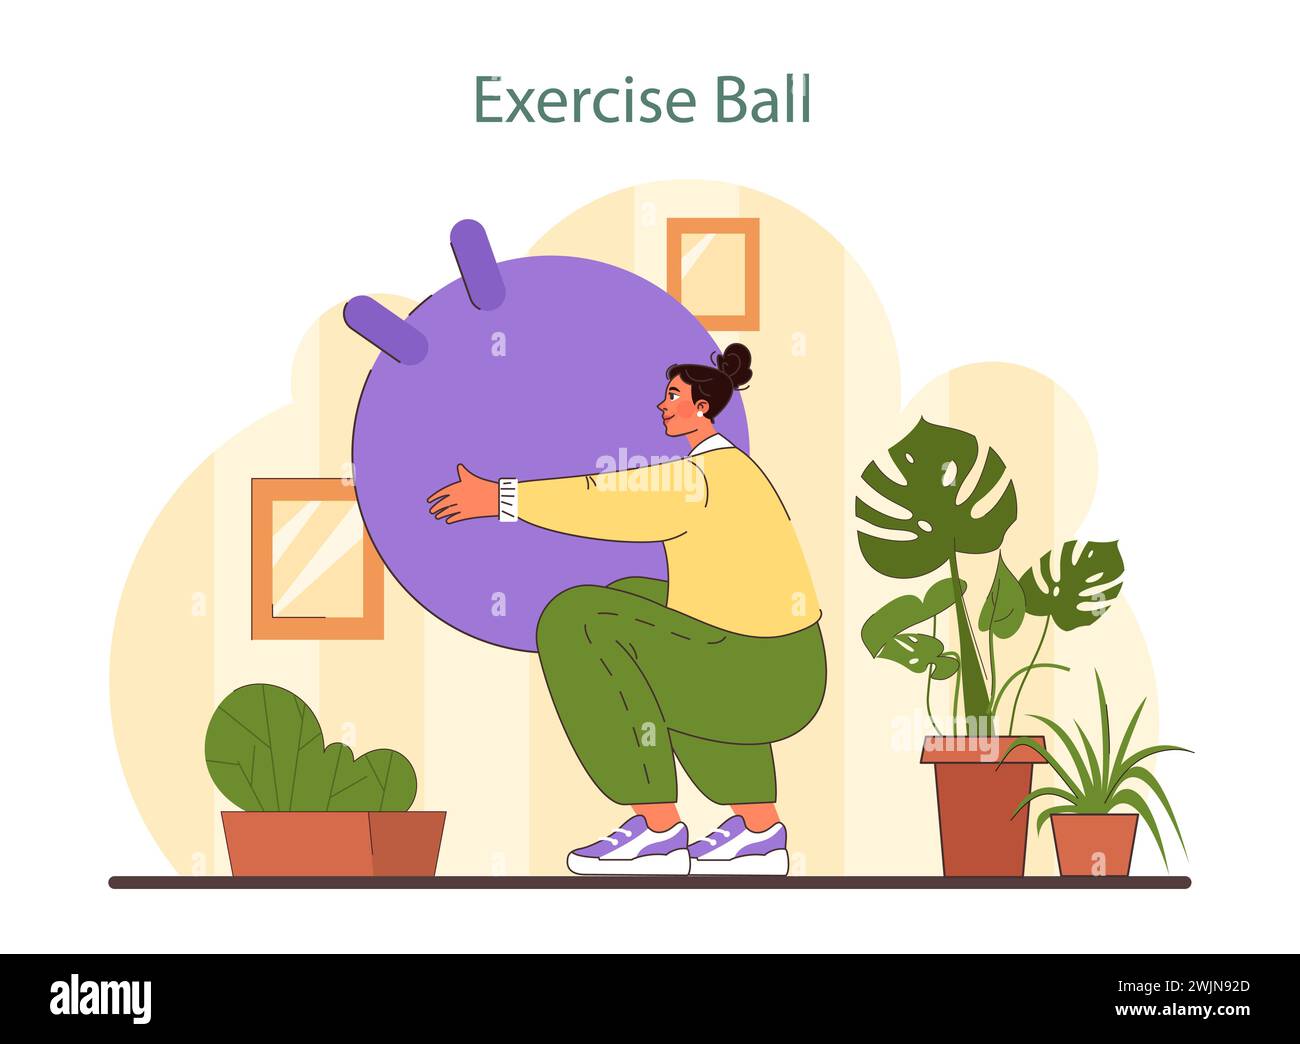 Exercise Ball illustration. A woman in casual workout attire uses an exercise ball at home, a scene combining fitness and domestic life. Perfect for home gym concepts. Flat vector illustration. Stock Vector